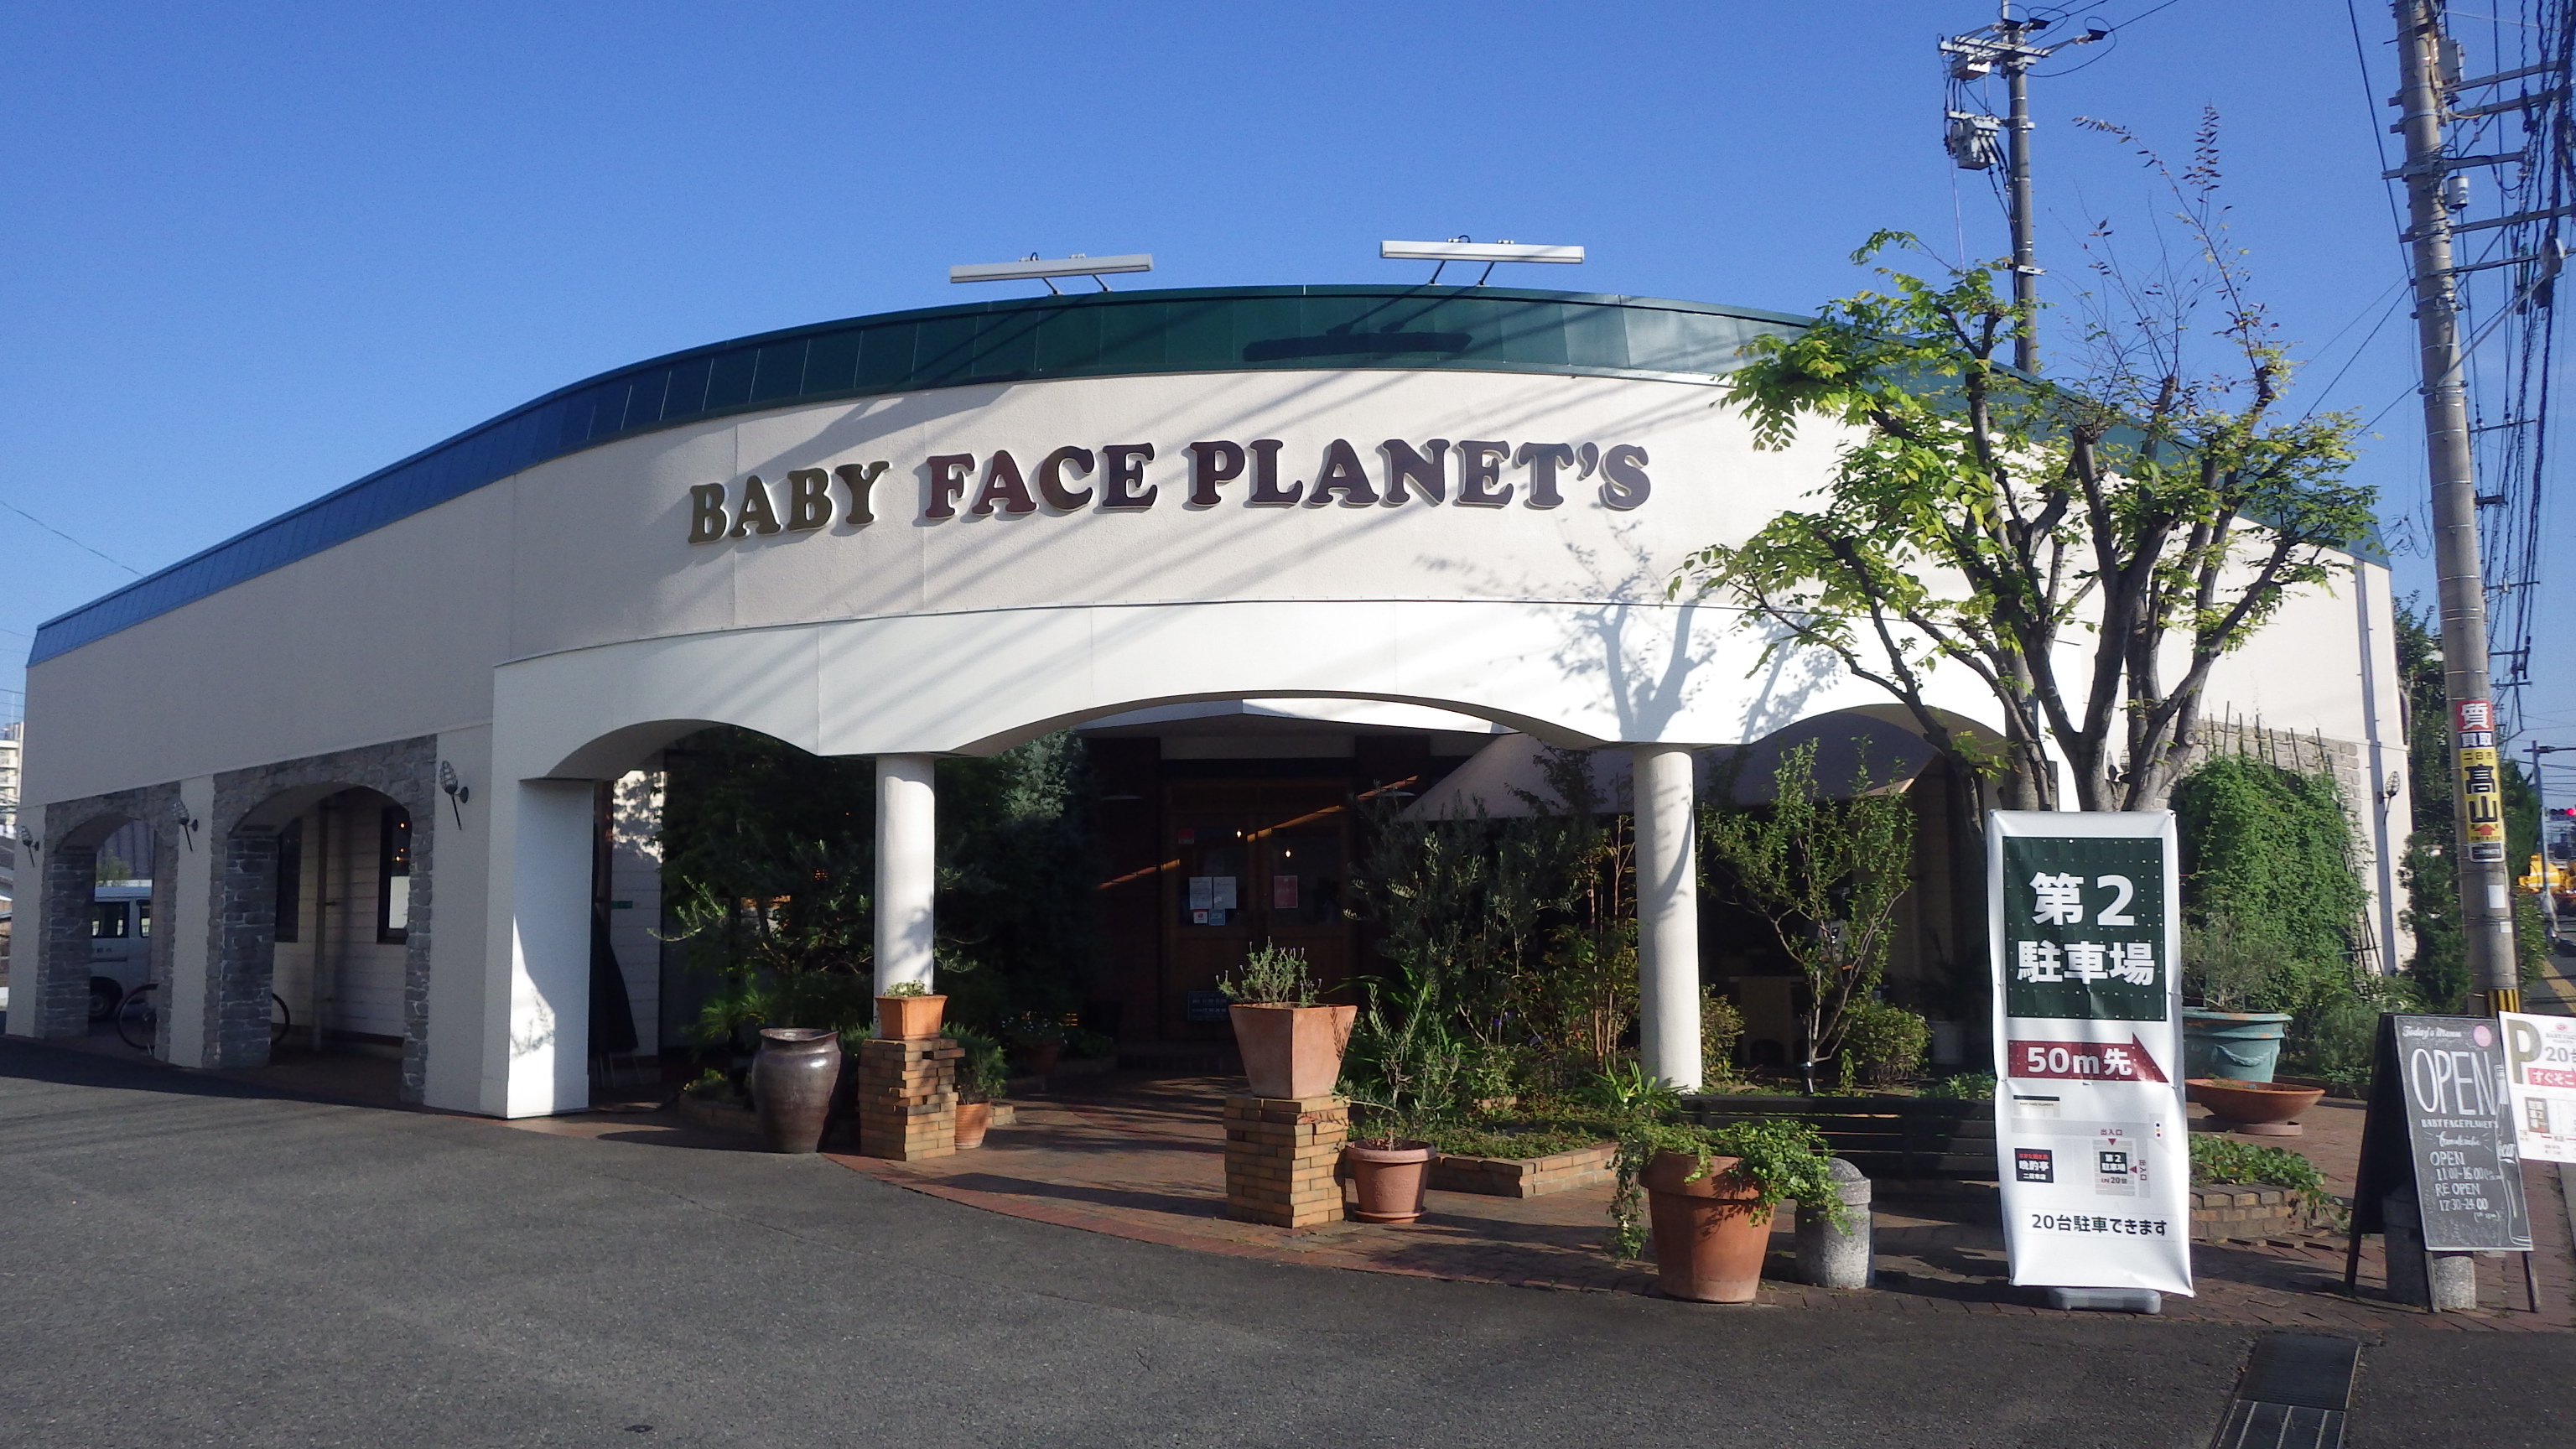 BABY FACE PLANETs二日市店の写真